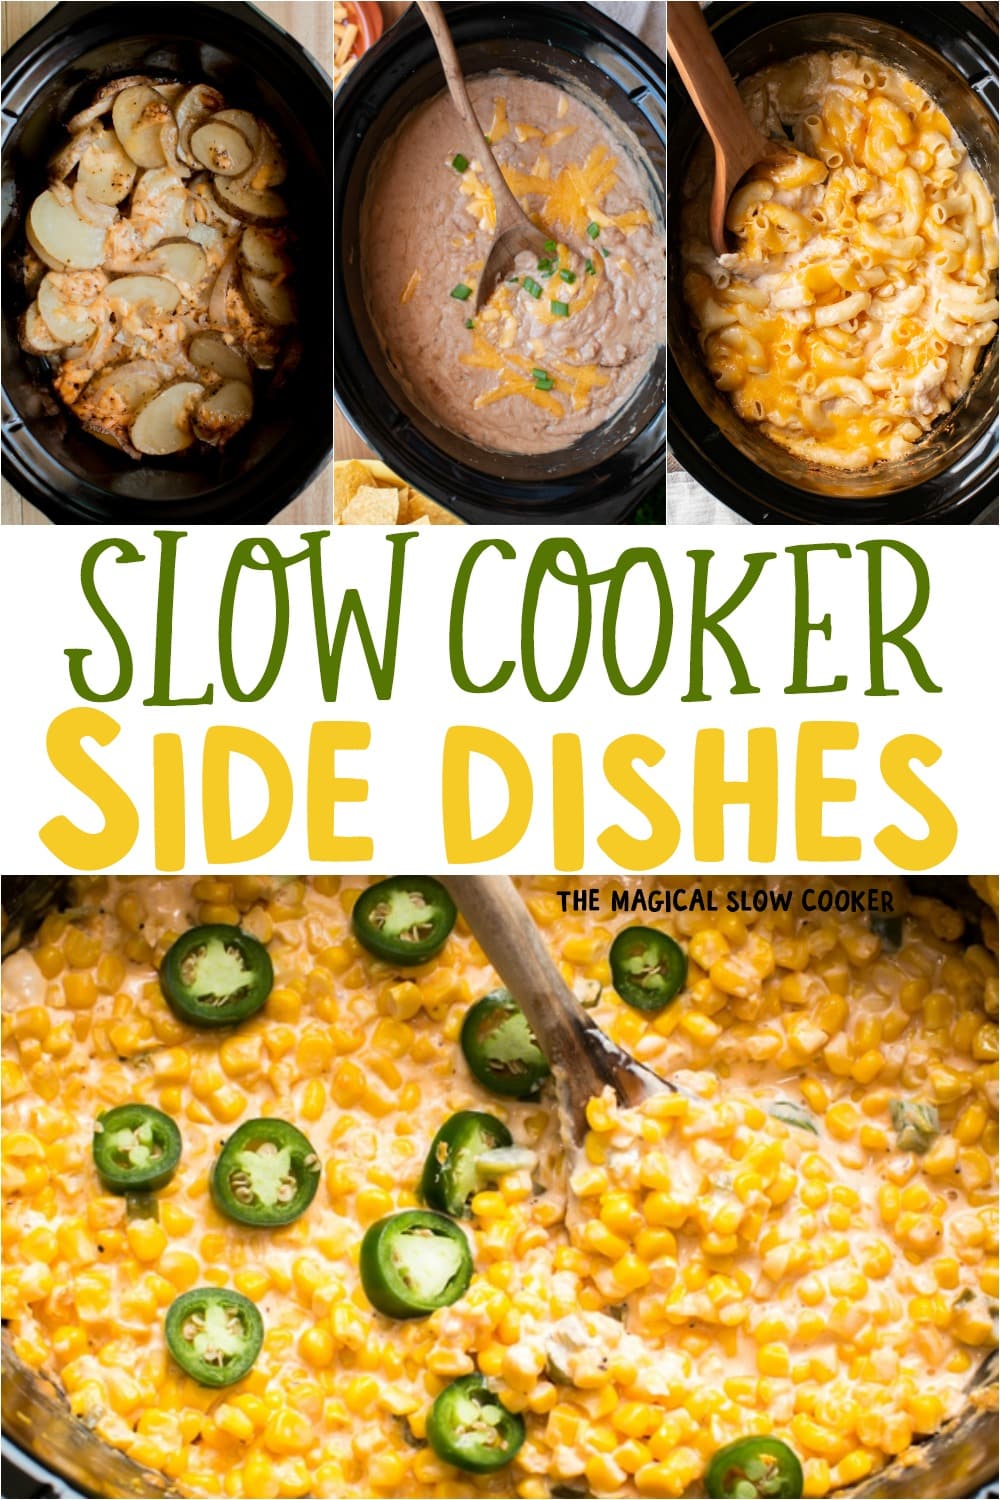 Collage of side dish photos with text overlay that says Slow Cooker Side Dishes.